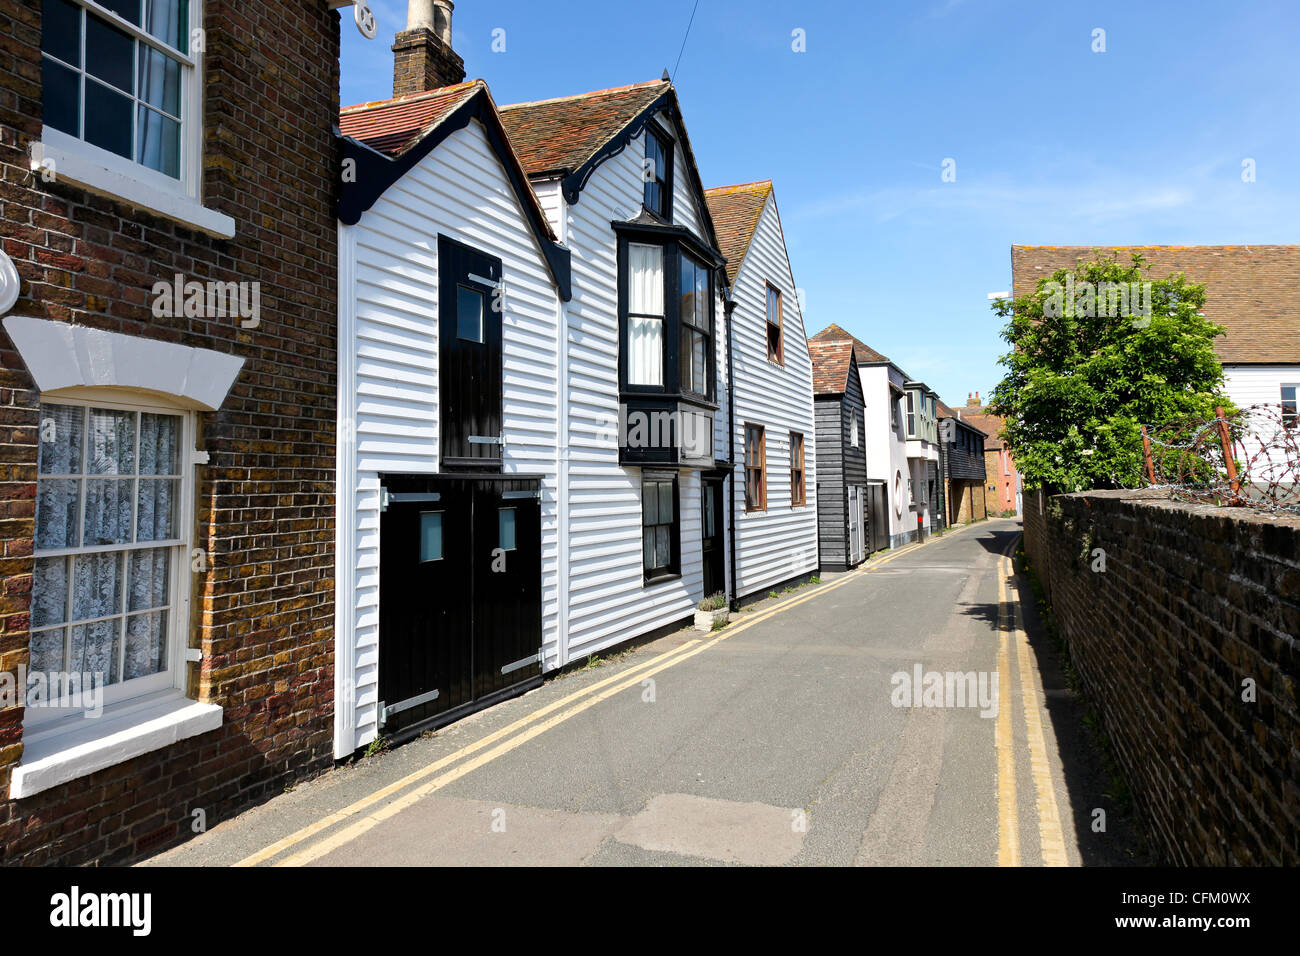 Traditional white painted weatherboarded houses in a side street of the coastal town of Whitstable, Kent, UK Stock Photo